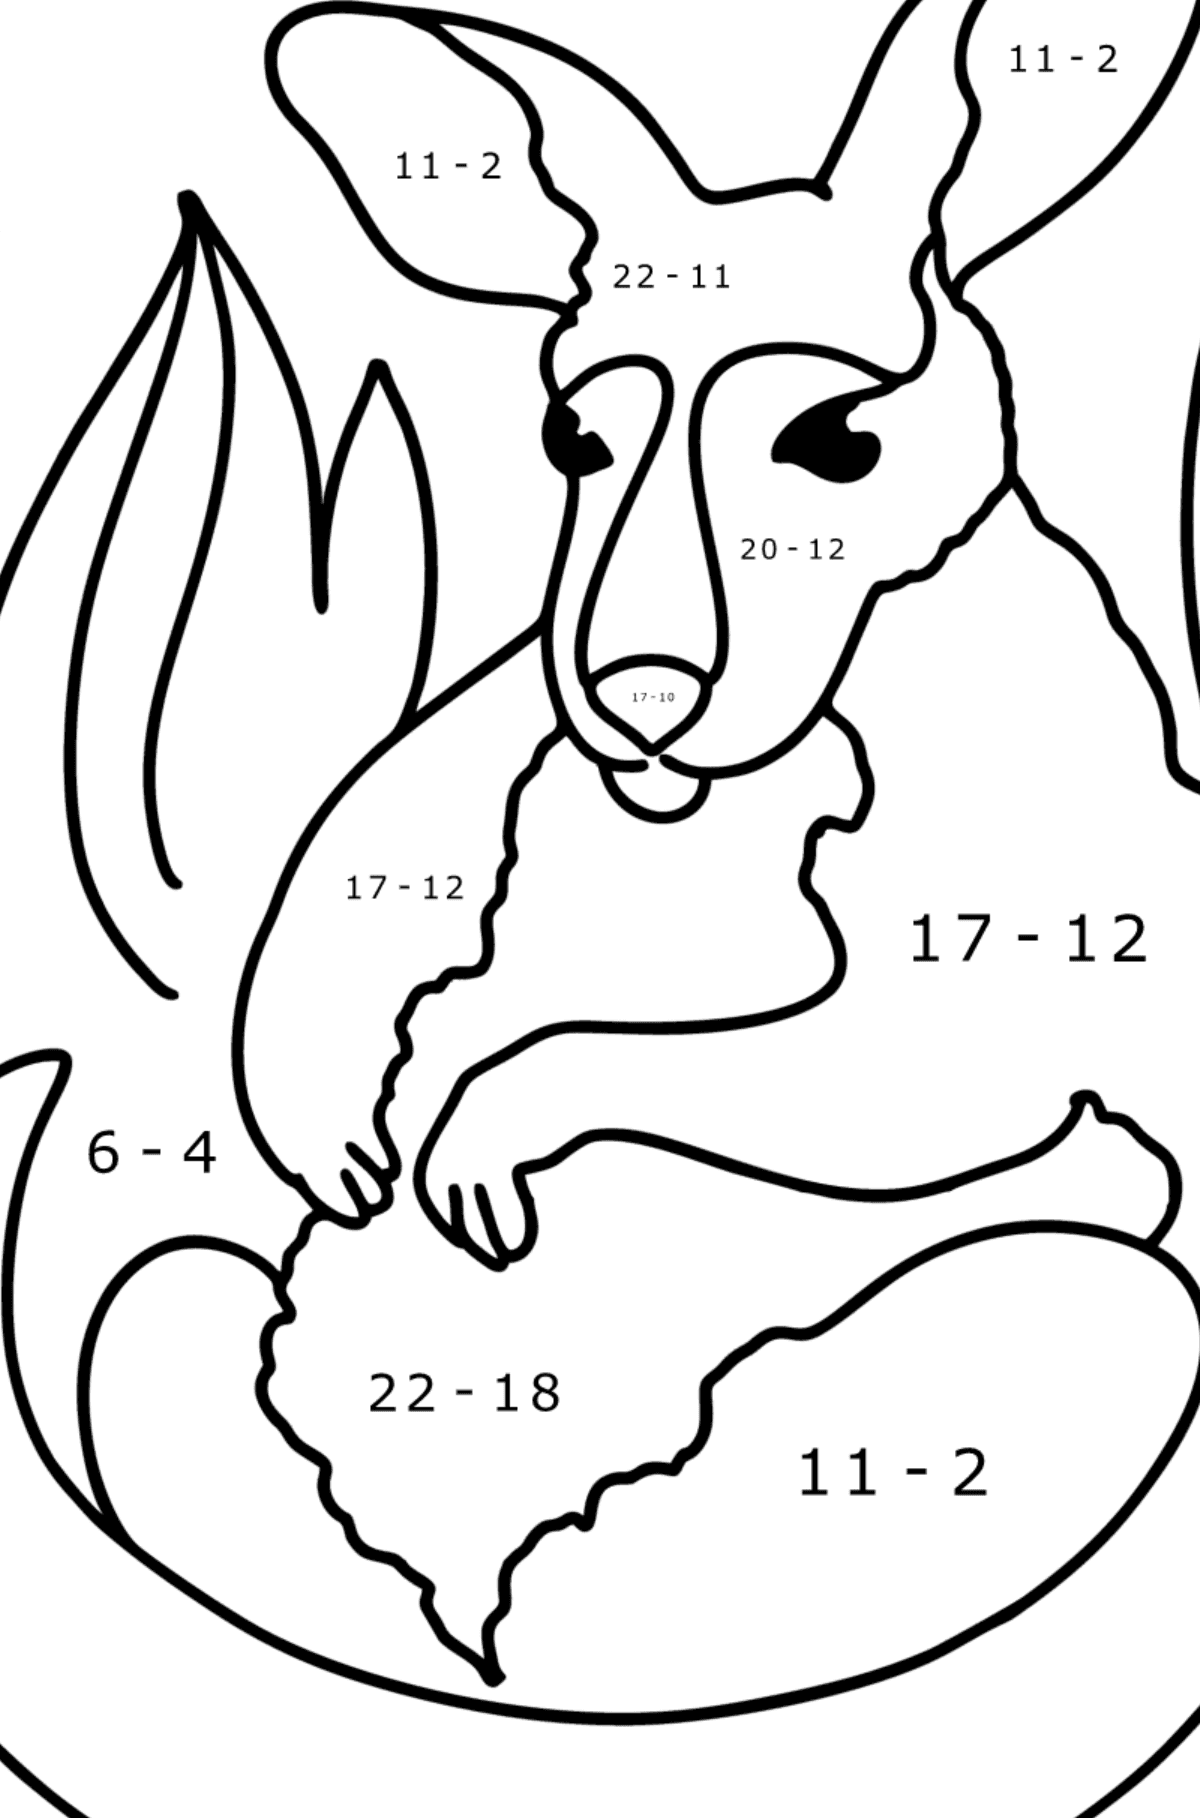 Coloring page - Adorable baby kangaroo - Math Coloring - Subtraction for Kids